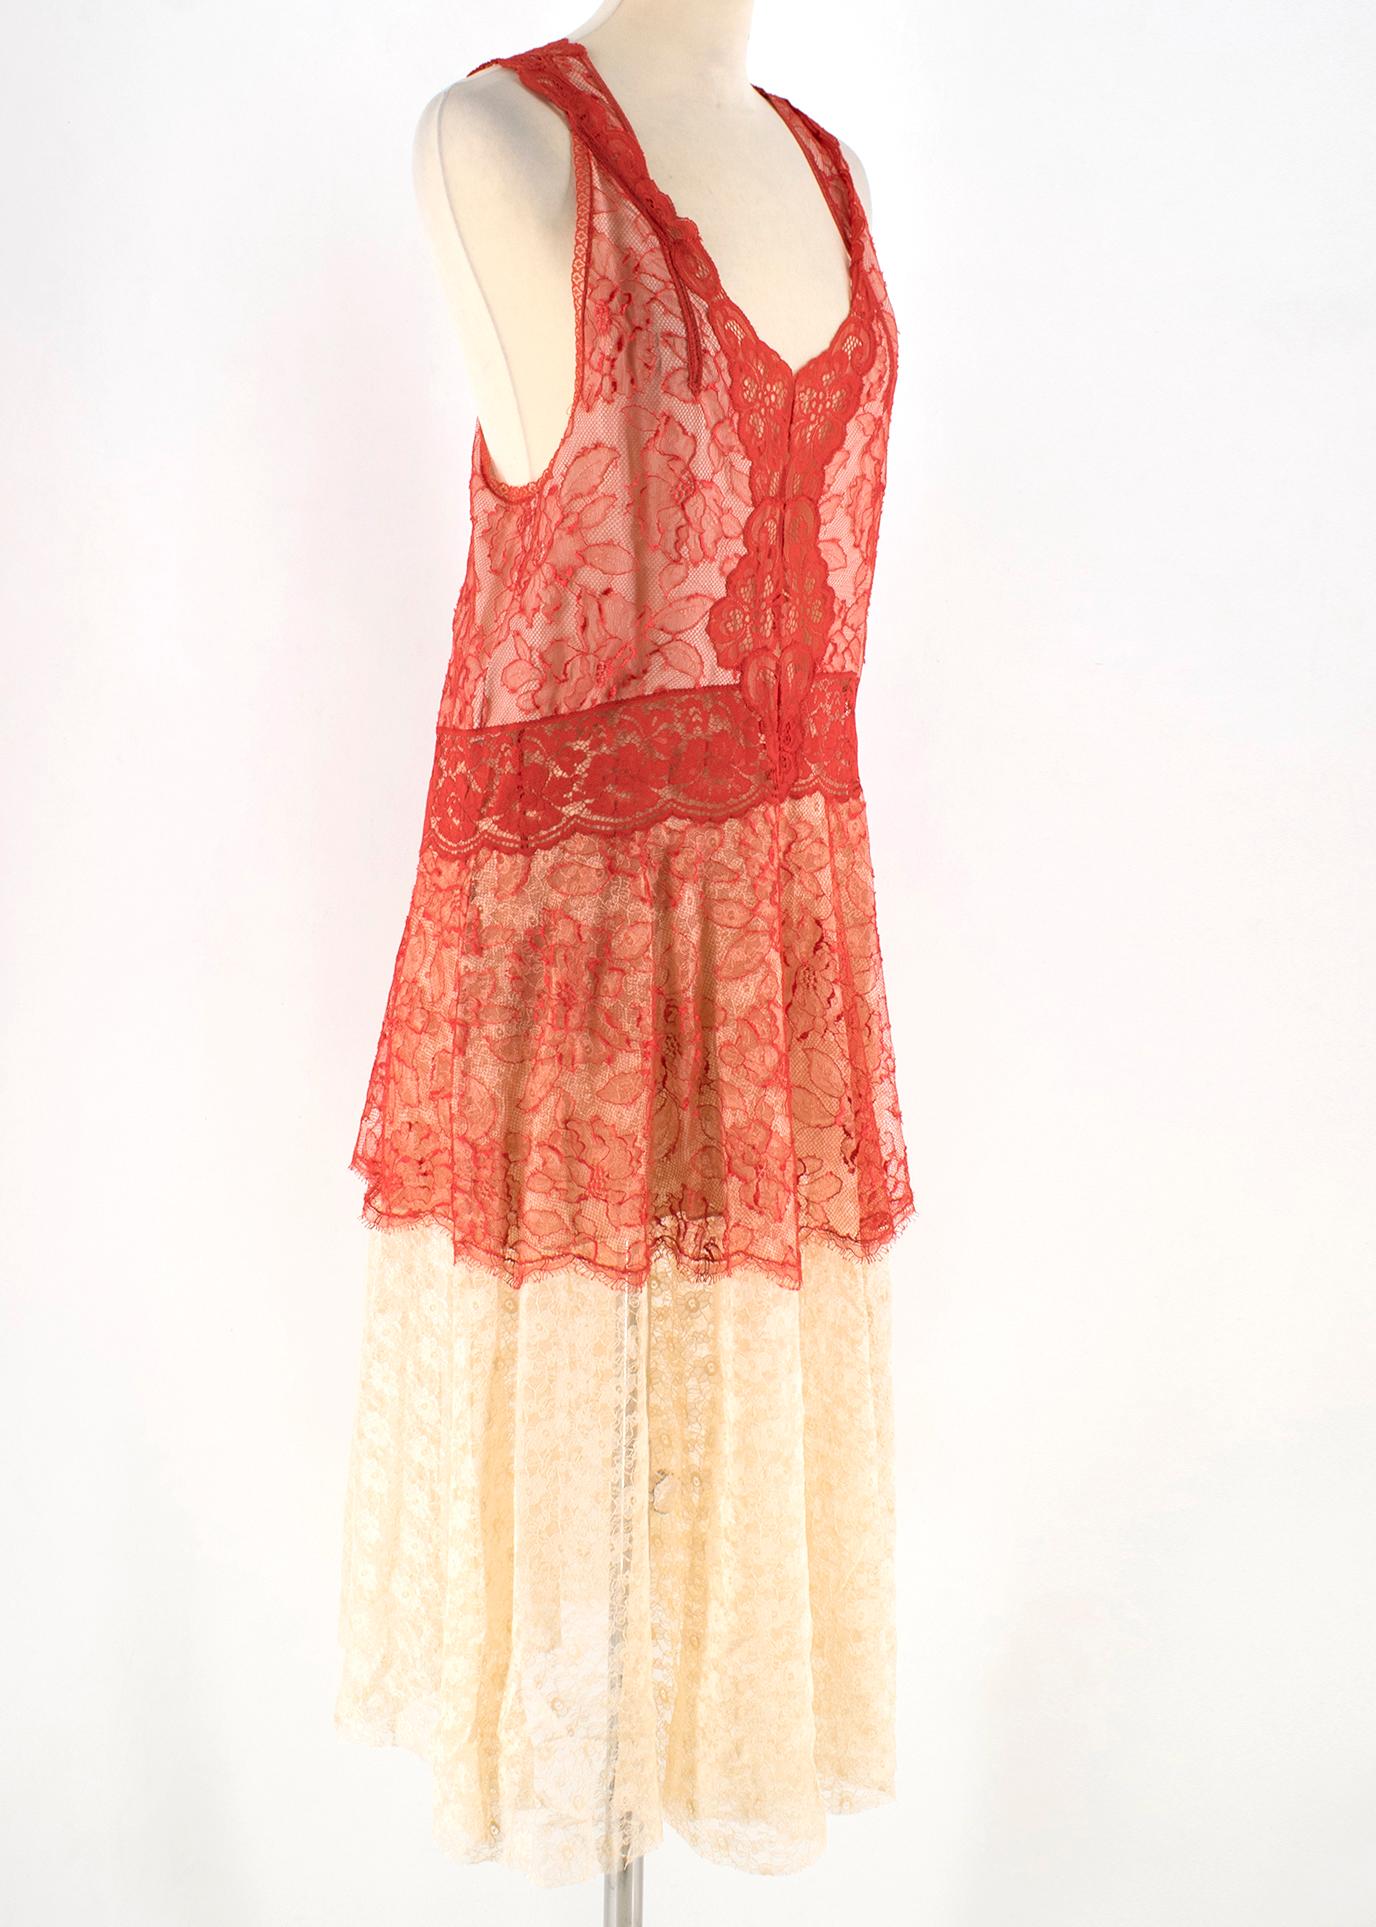 Stella McCartney Red Sleeveless Dress with a slightly sheer beige under-layer panel, double v neck and back with side zip closure

Please note, these items are pre-owned and may show signs of being stored even when unworn and unused. This is